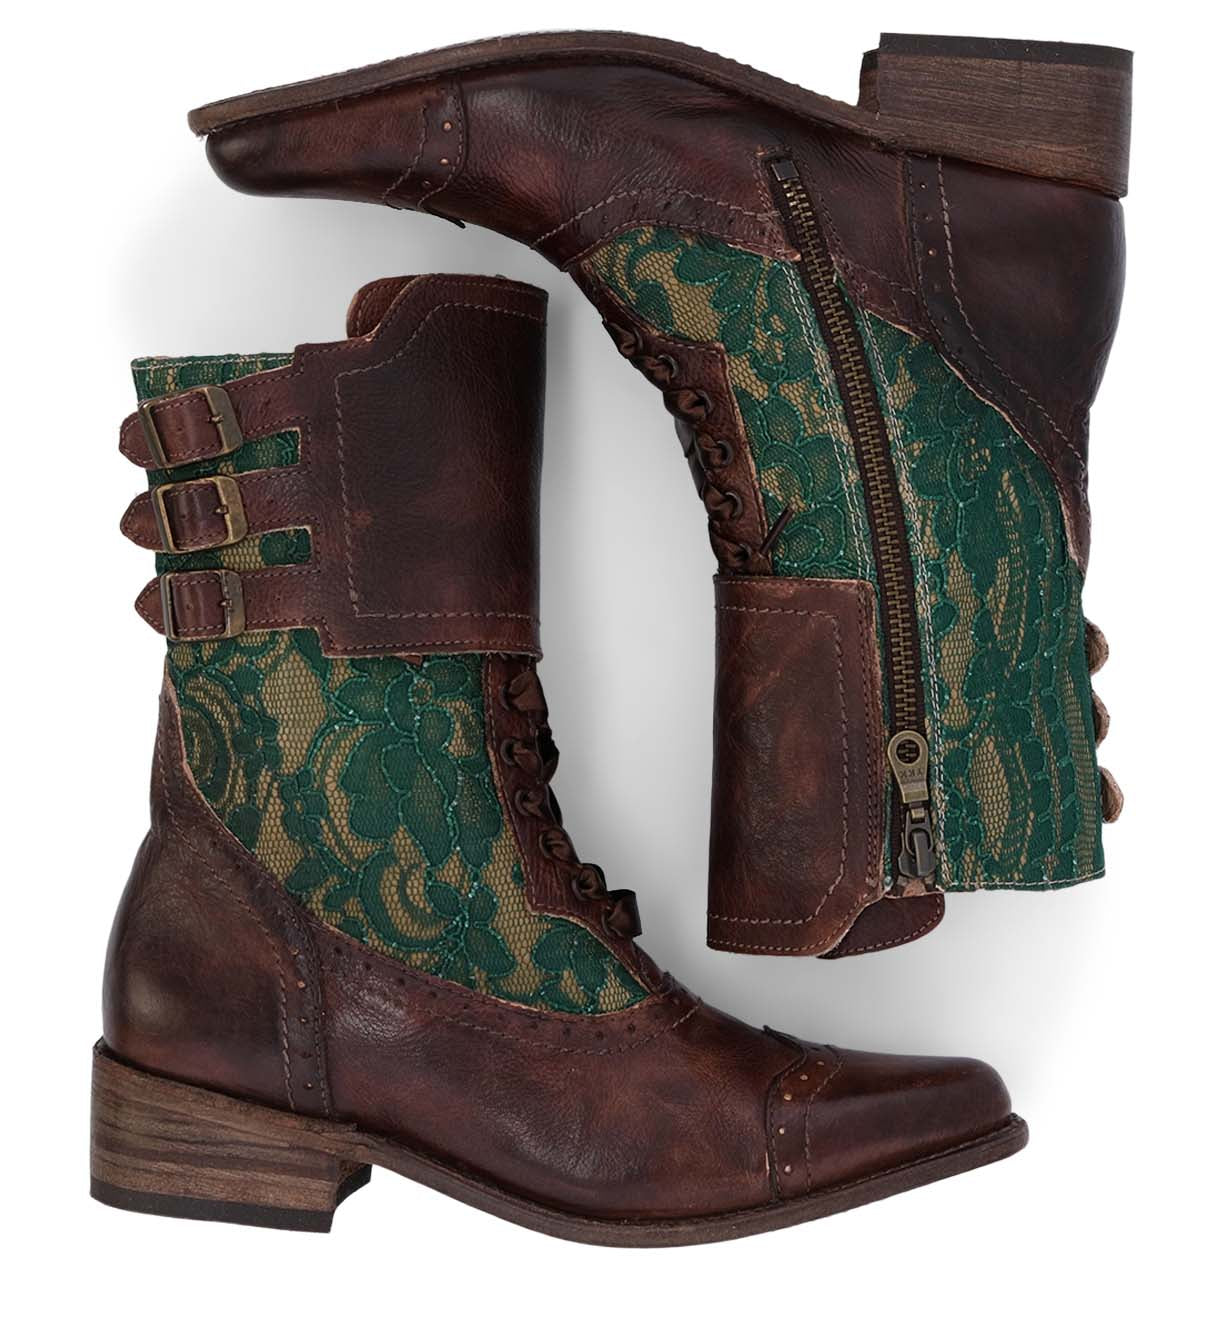 A handcrafted pair of Faye boots by Oak Tree Farms, in brown and green with zippers, perfect for riding.